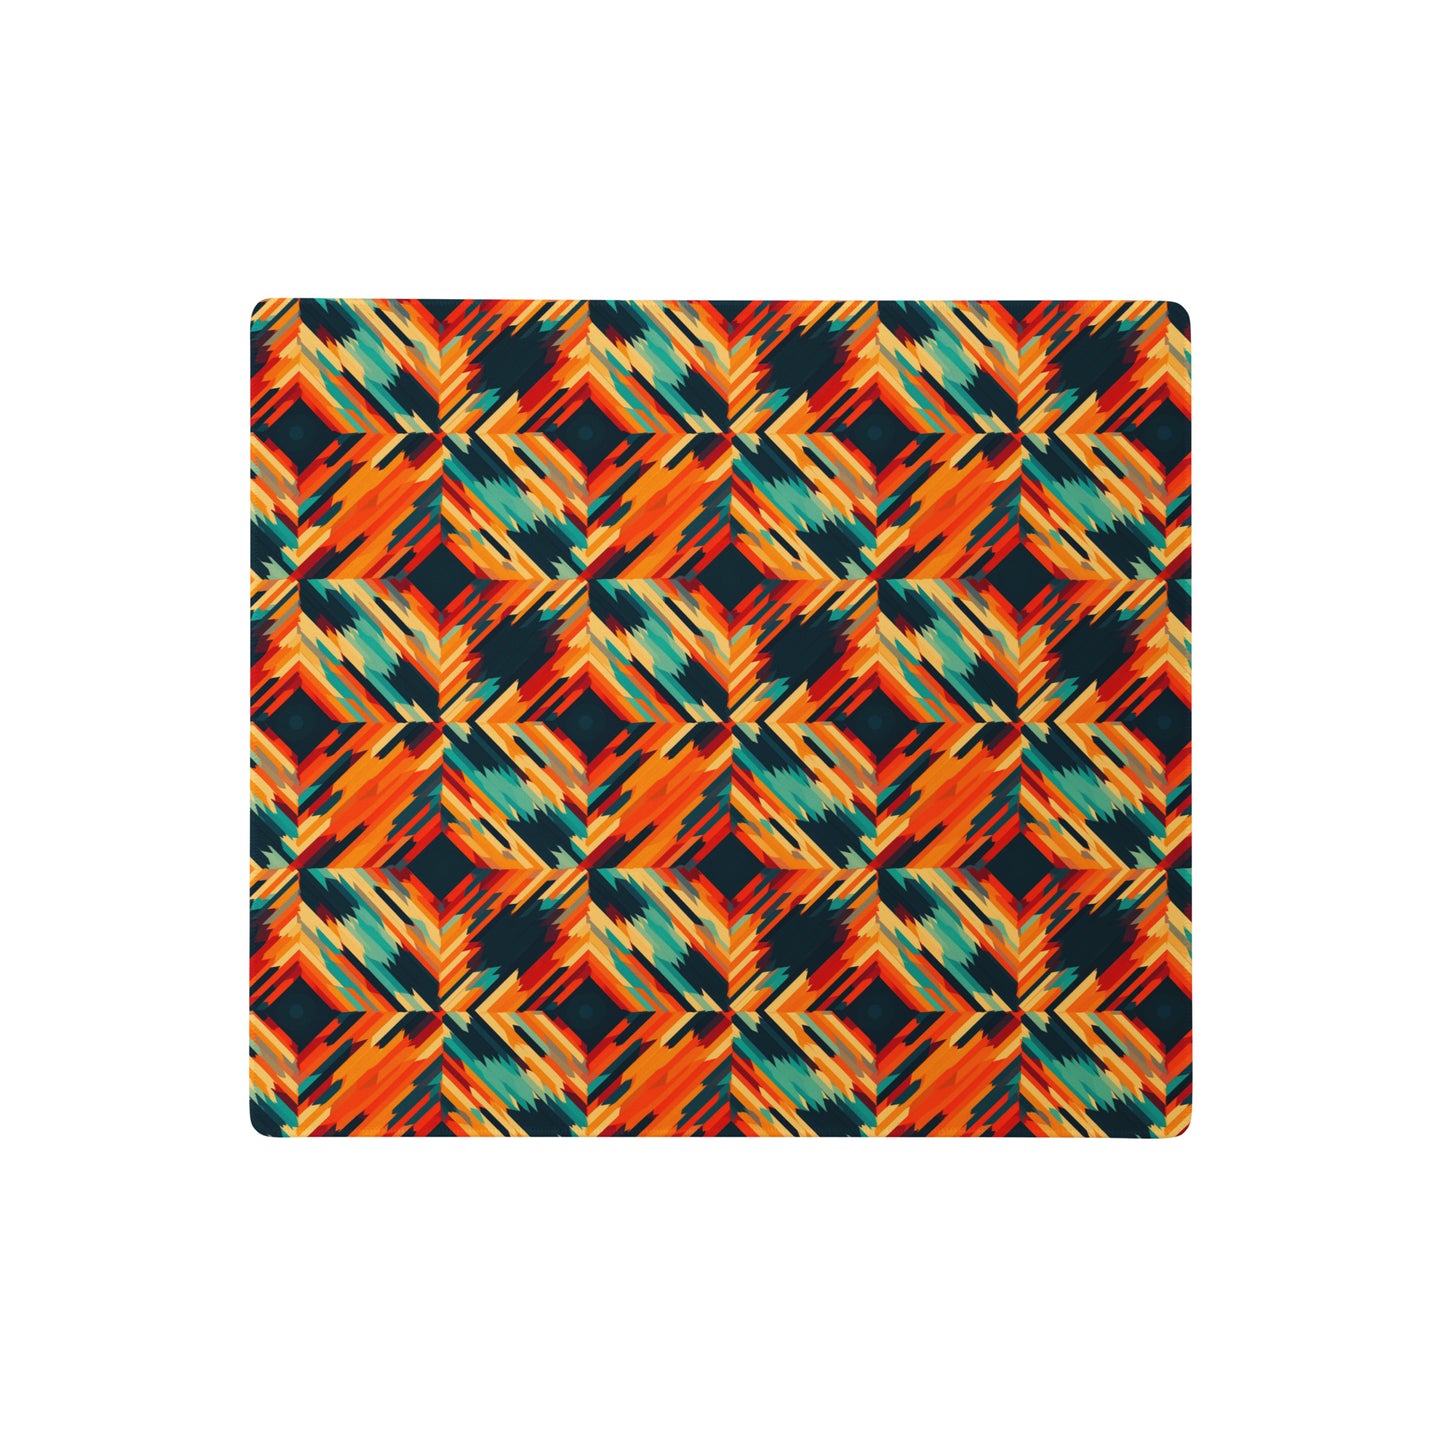 A 18" x 16" desk pad with a tiled abstract pattern on it. Orange in color.